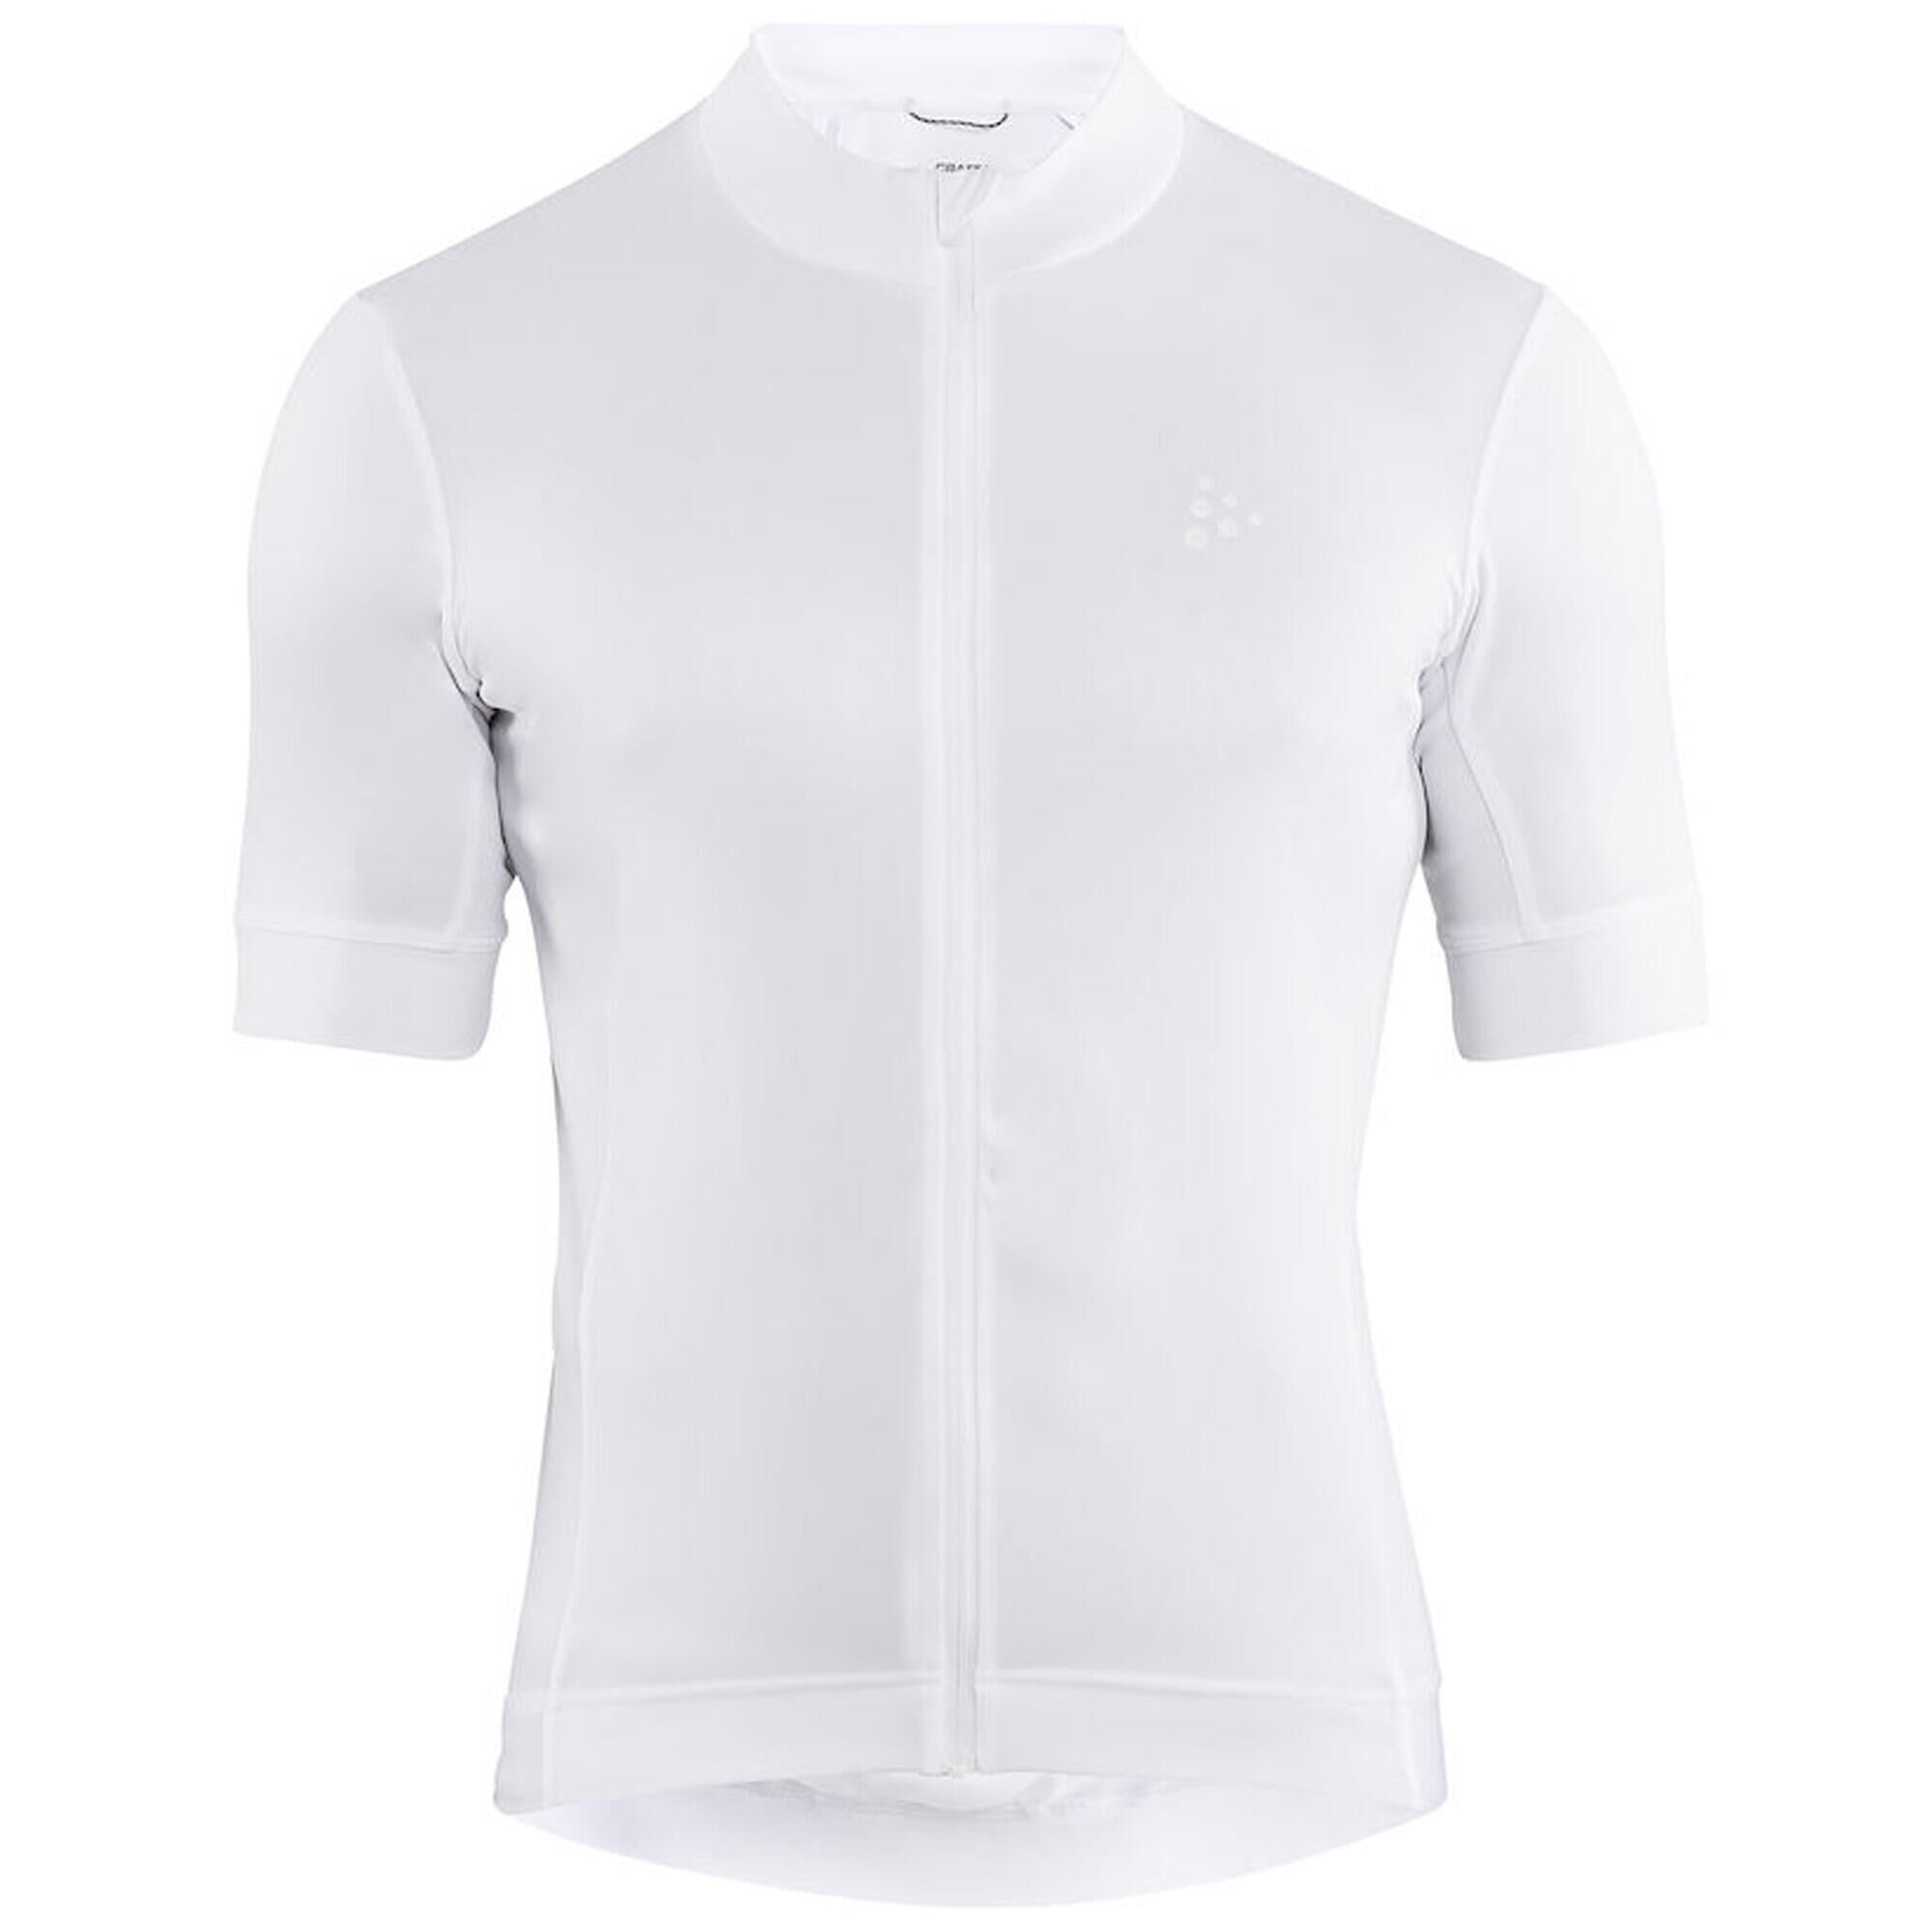 CRAFT Mens Essence Cycling Jersey (White)